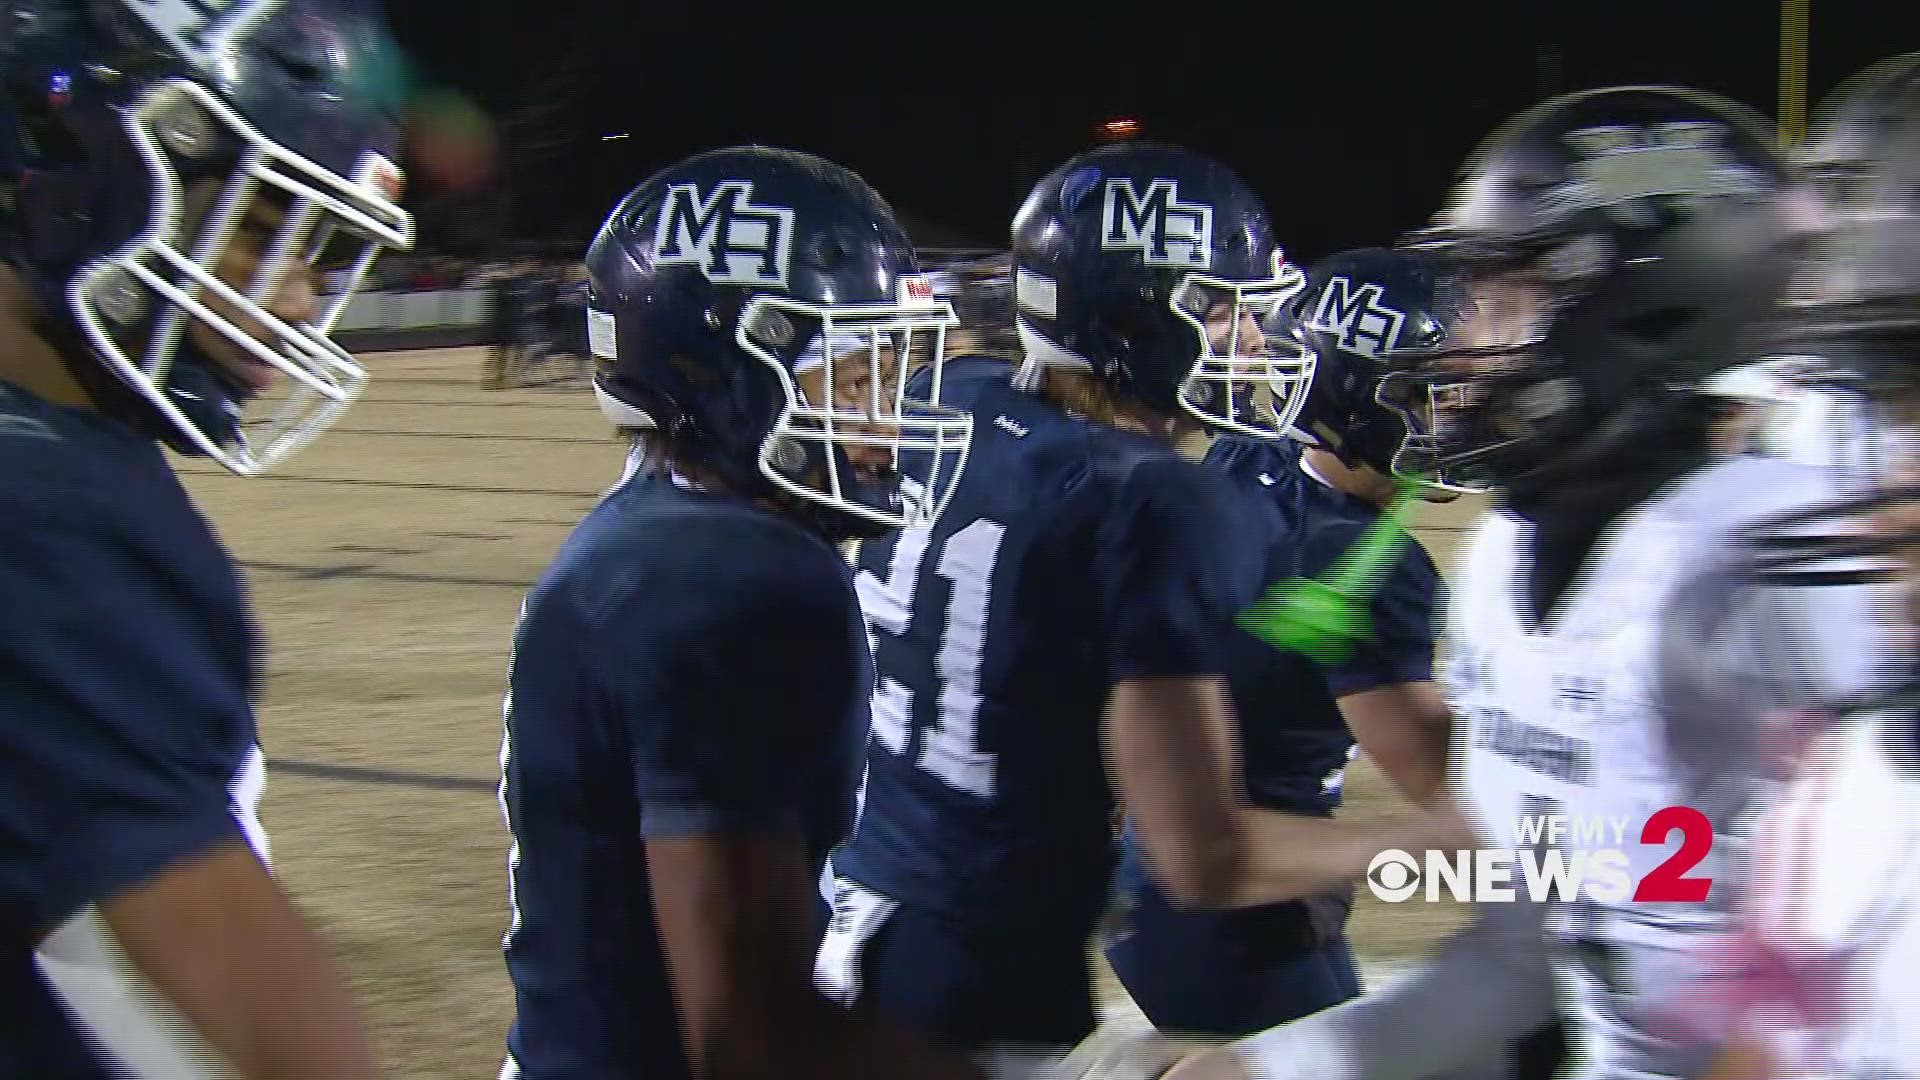 Mount Airy wins 35-6.  Tyler Mason finishes with 290 yard & 5 TD's for the Granite Bears.